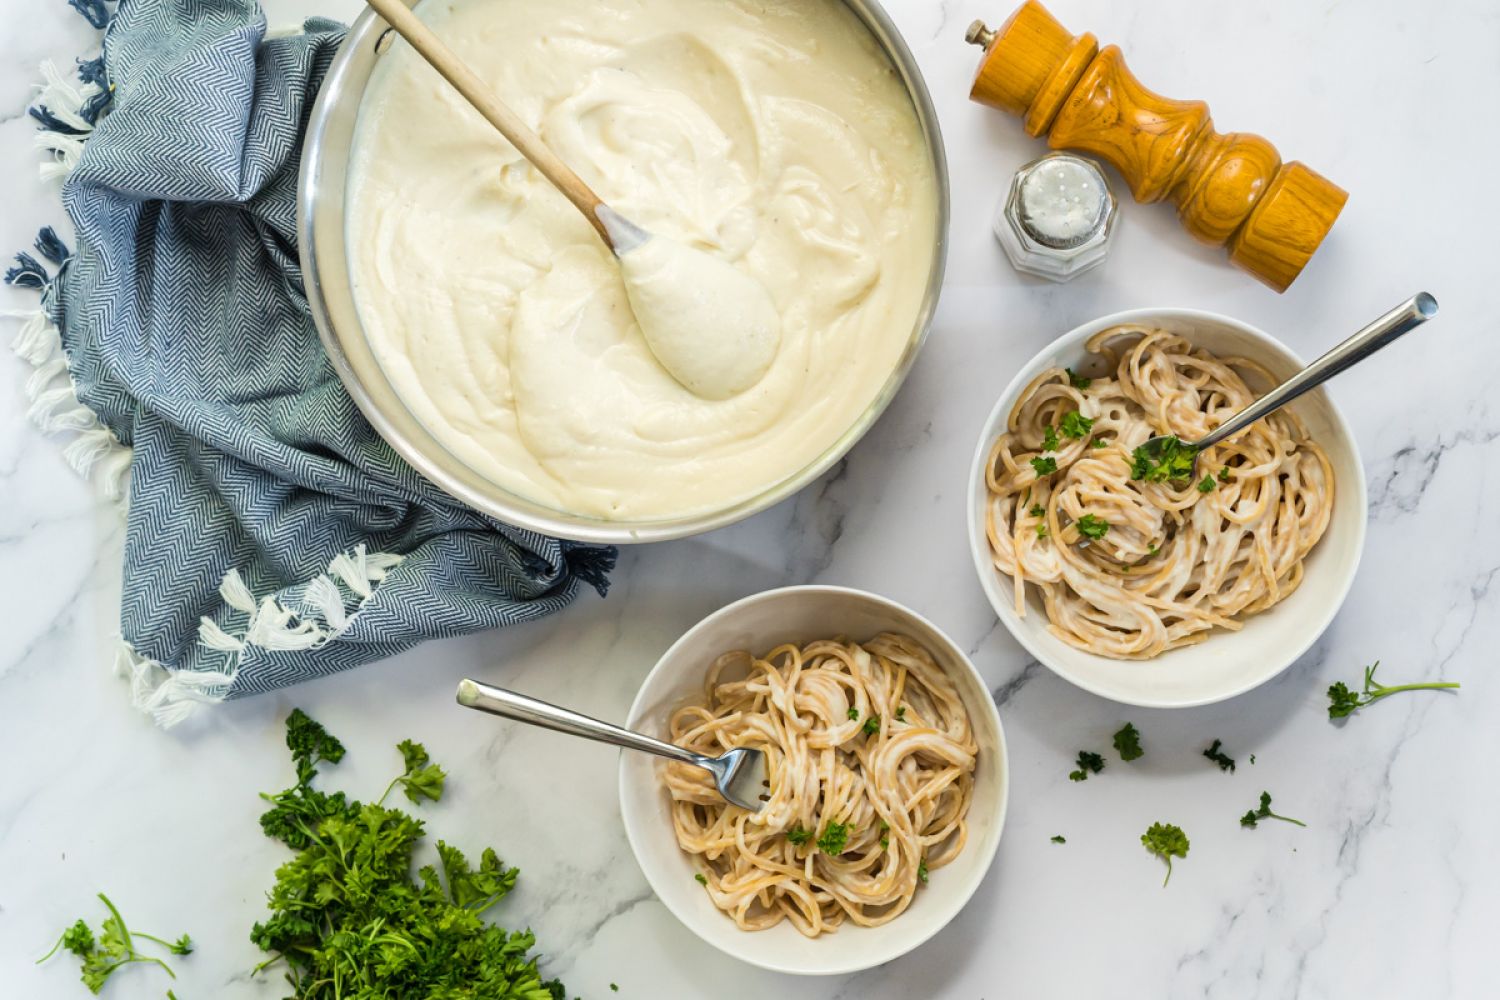 Skinny Alfredo sauce in a large pan with a wooden spoon and served in two bowls with spaghetti and parsley.